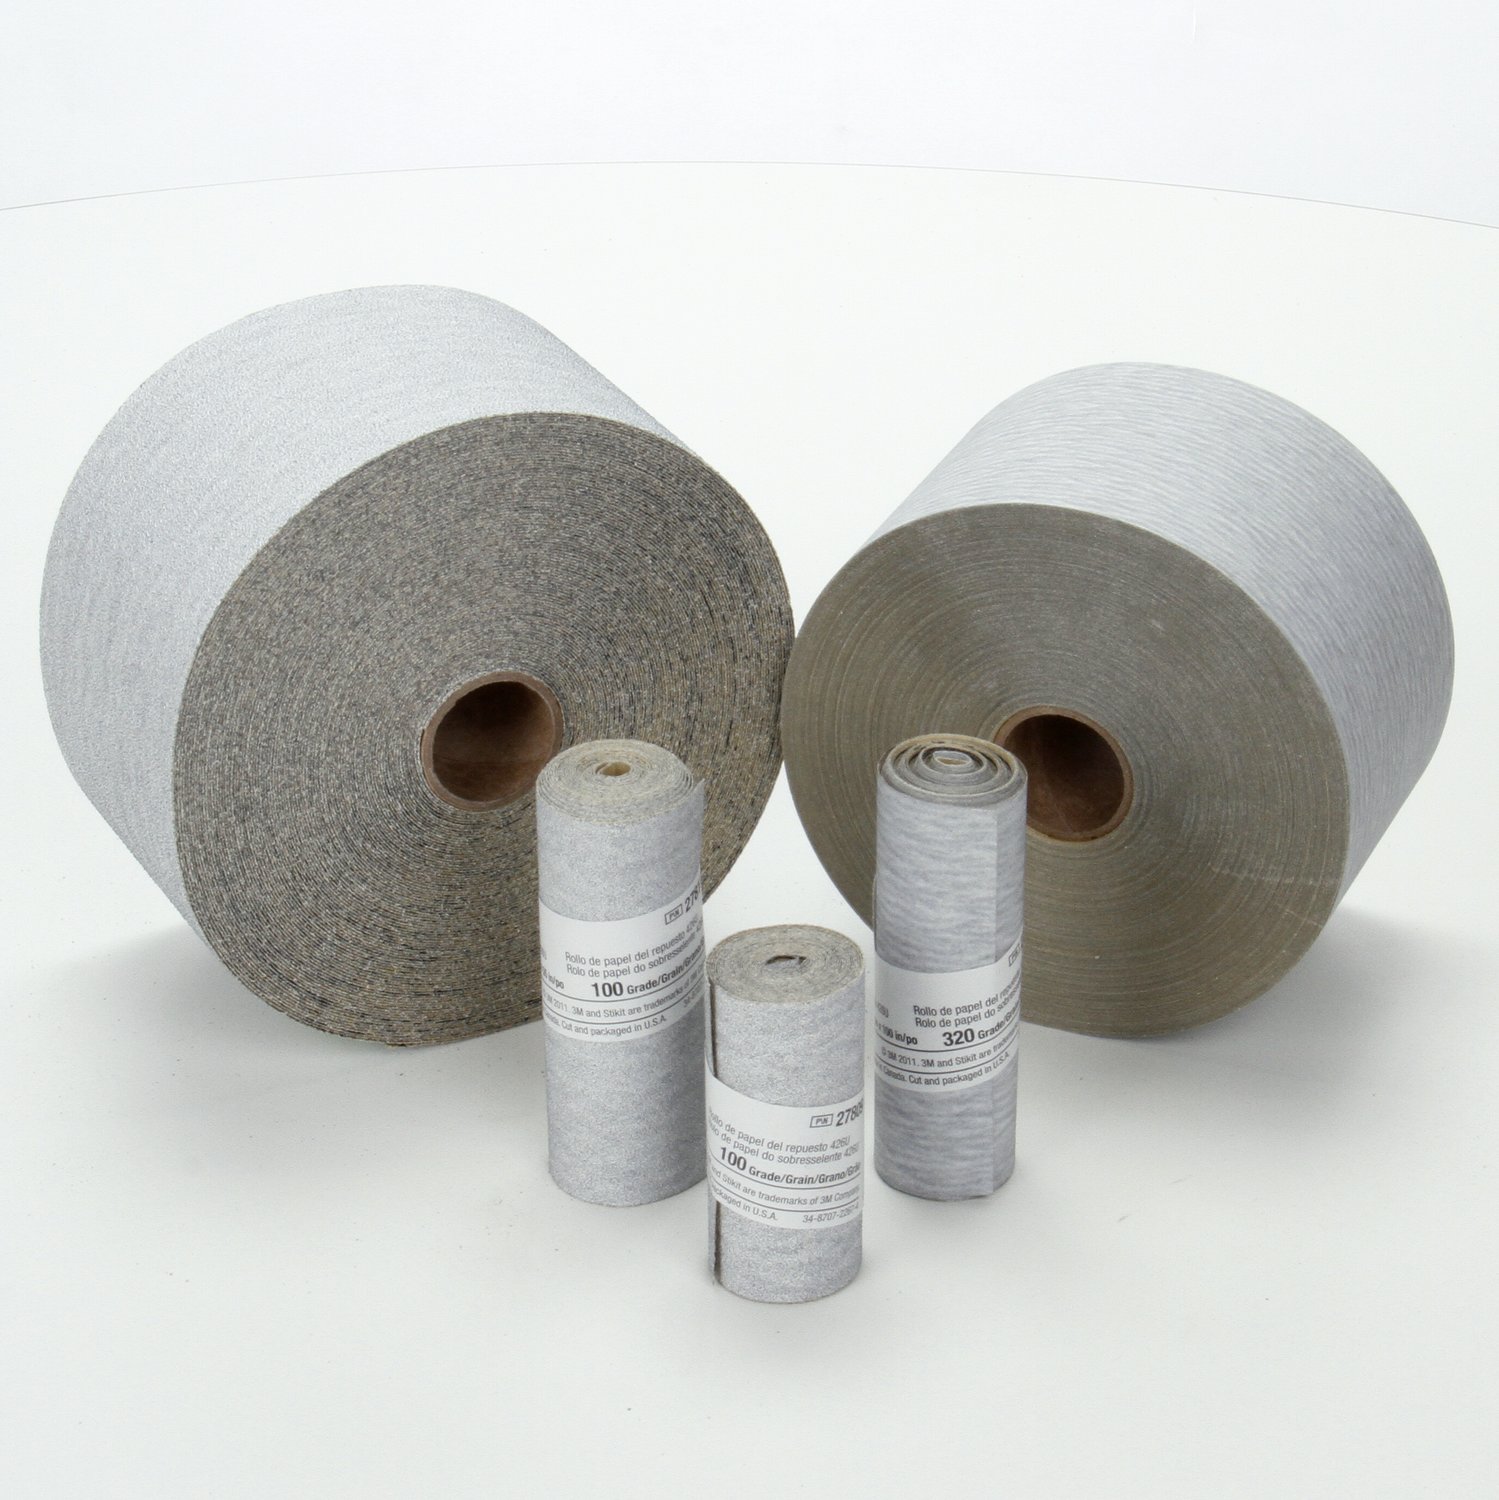 7100070166 - 3M Stikit Paper Roll 426U, 220 A-weight, Config